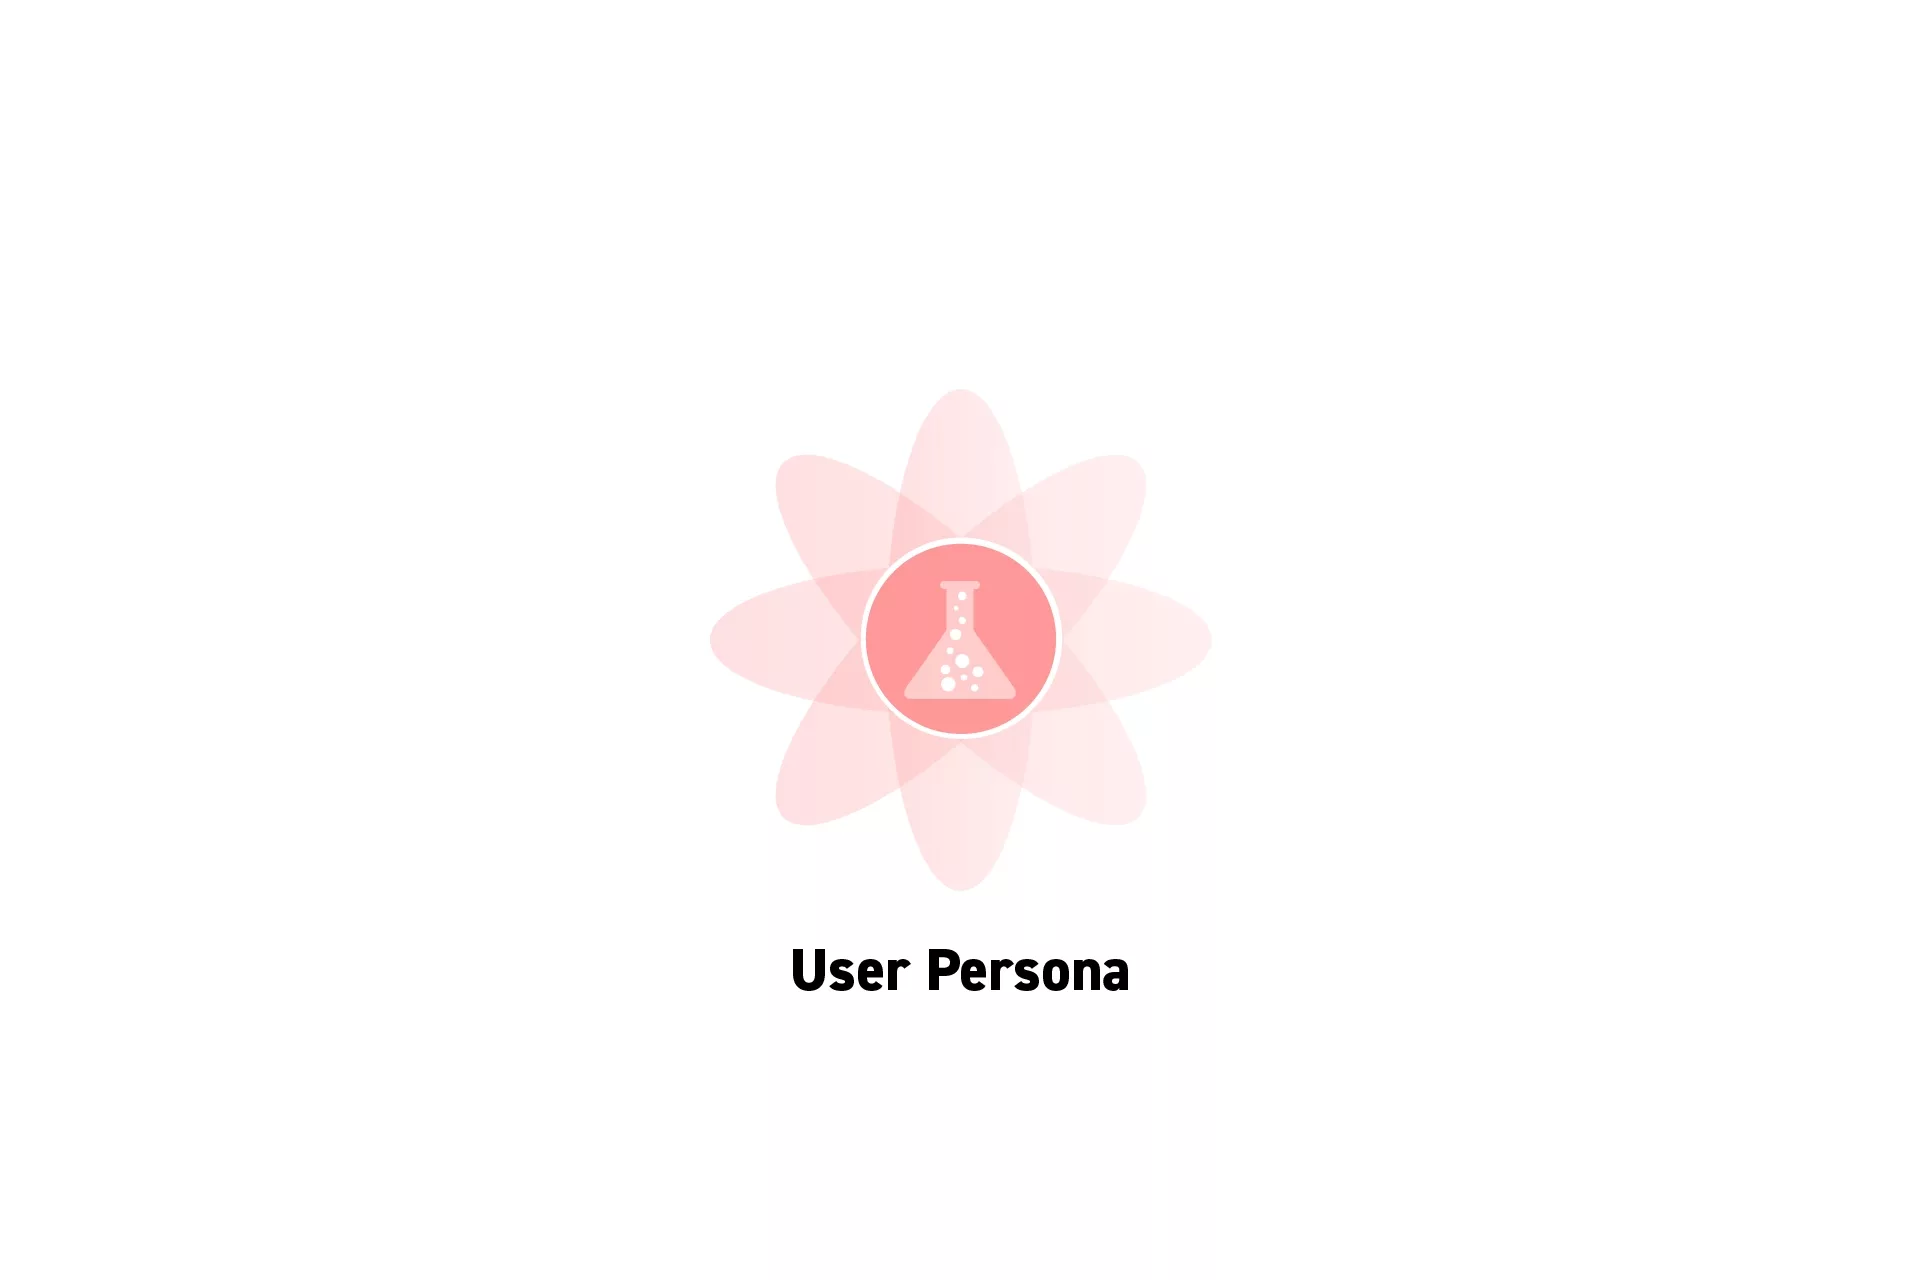 A flower that represents Strategy with the text “User Persona” beneath it.